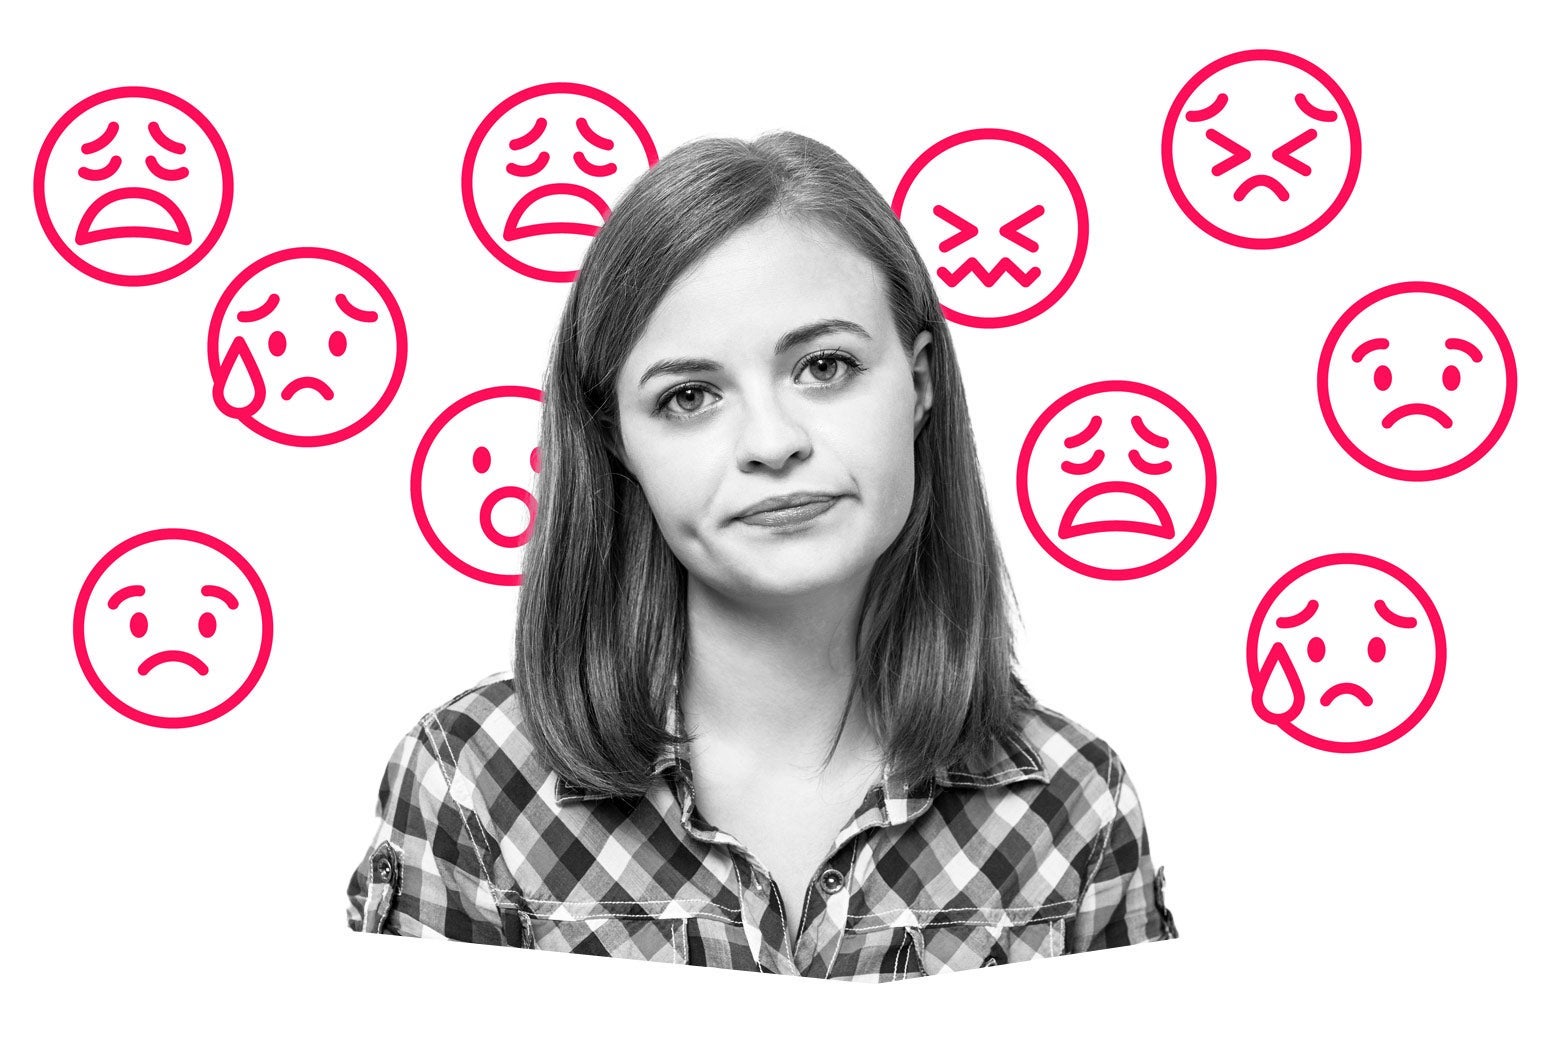 A woman looking annoyed and surrounded by various unhappy emoji